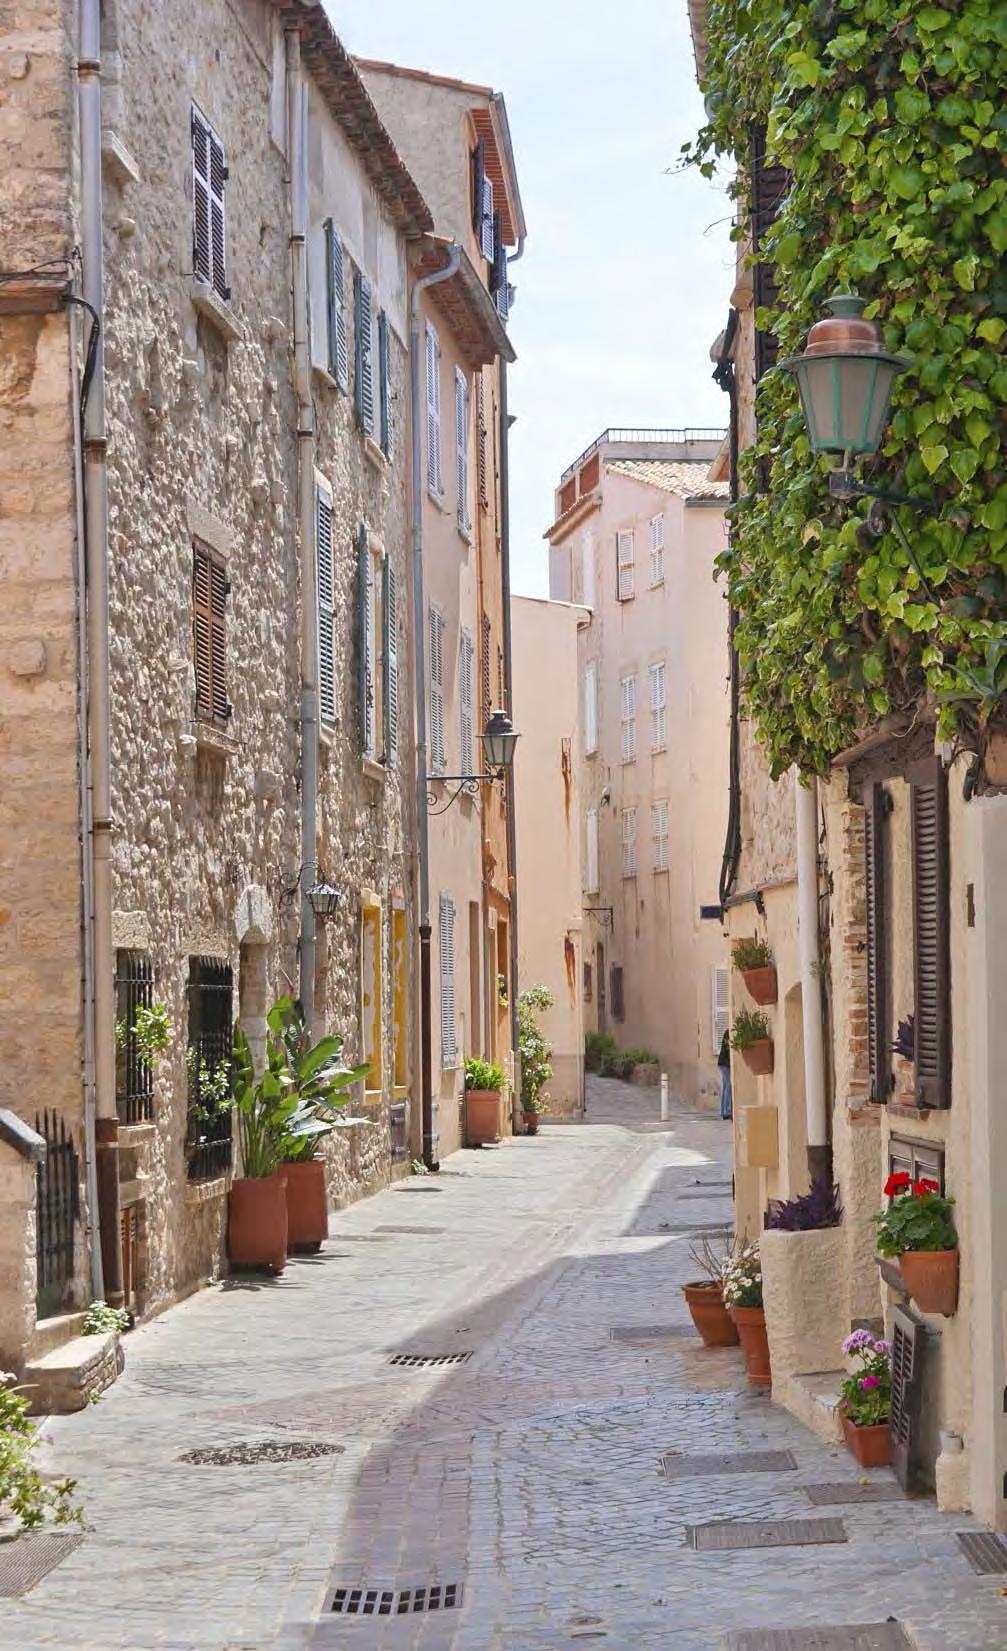 Stretch your legs ambling around the rustic old town and the ramparts along the sea.